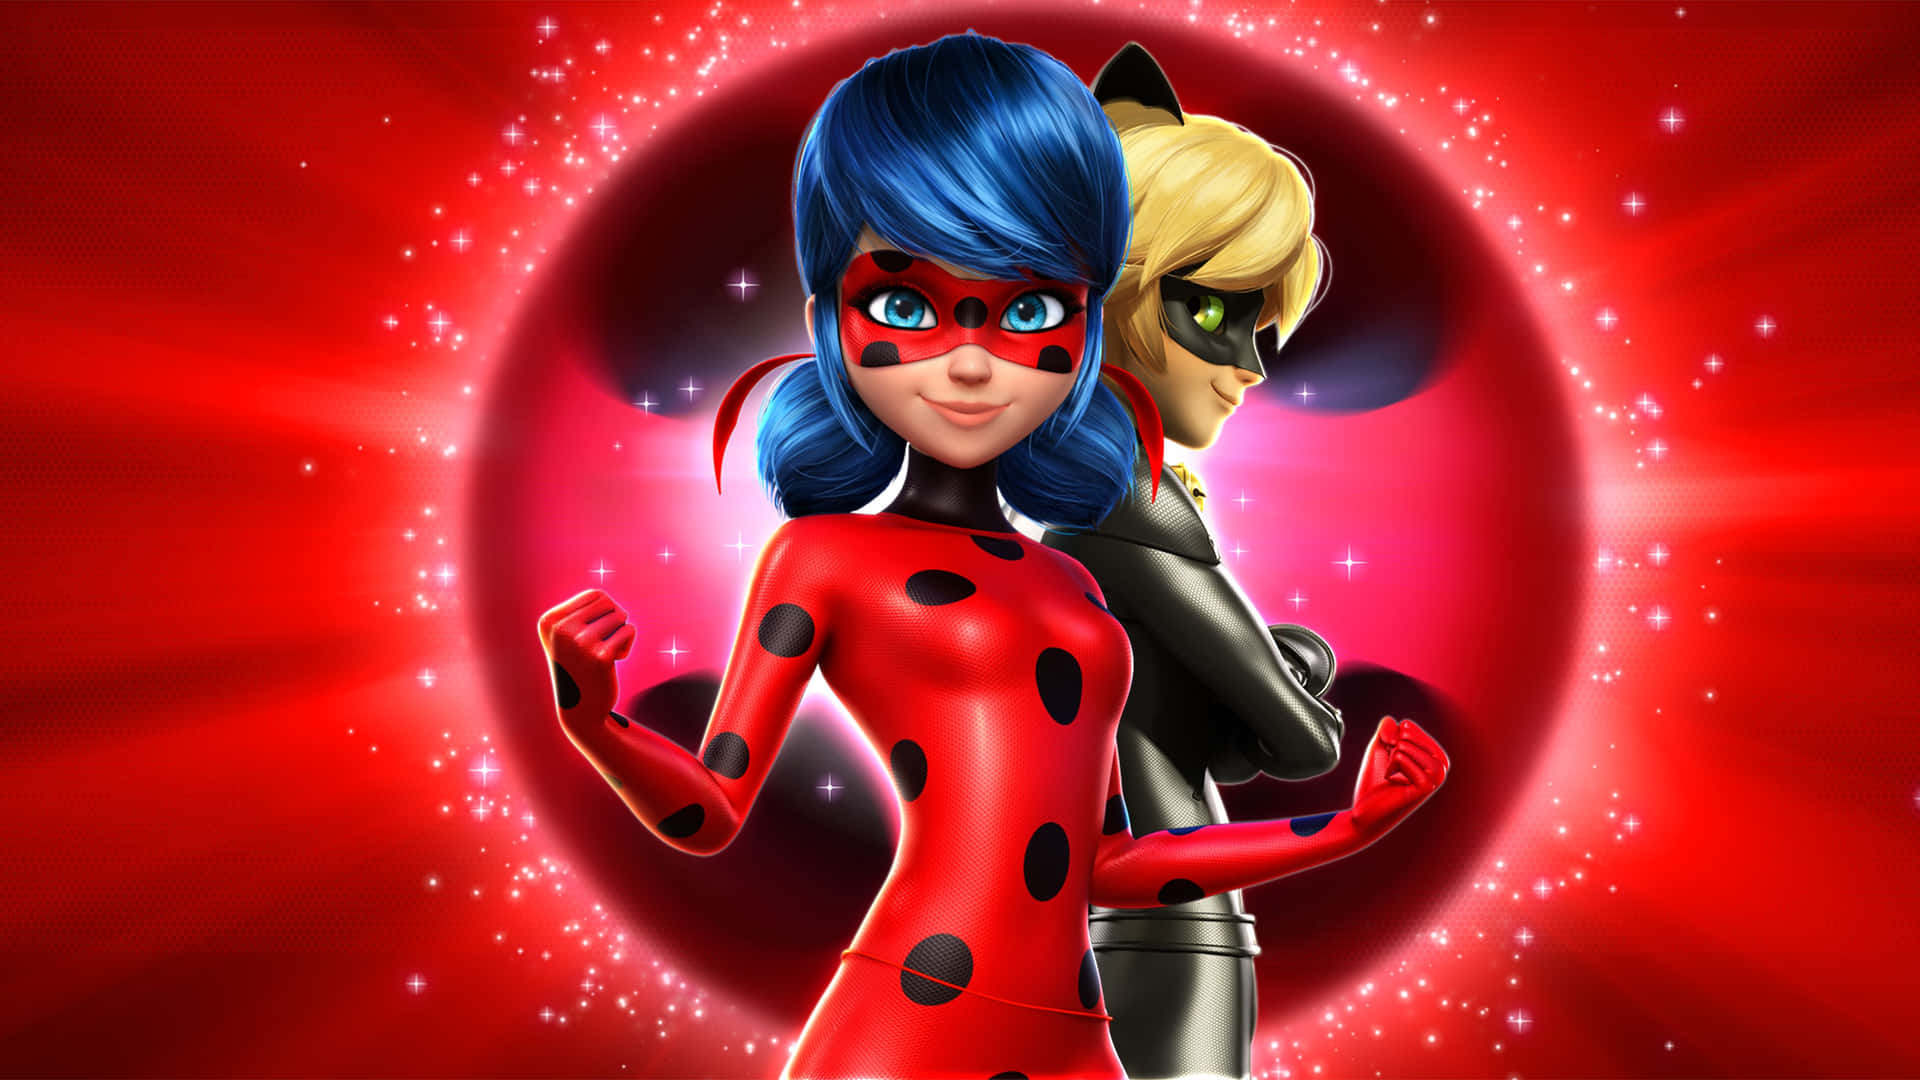 Miraculous Ladybug ready for another adventure